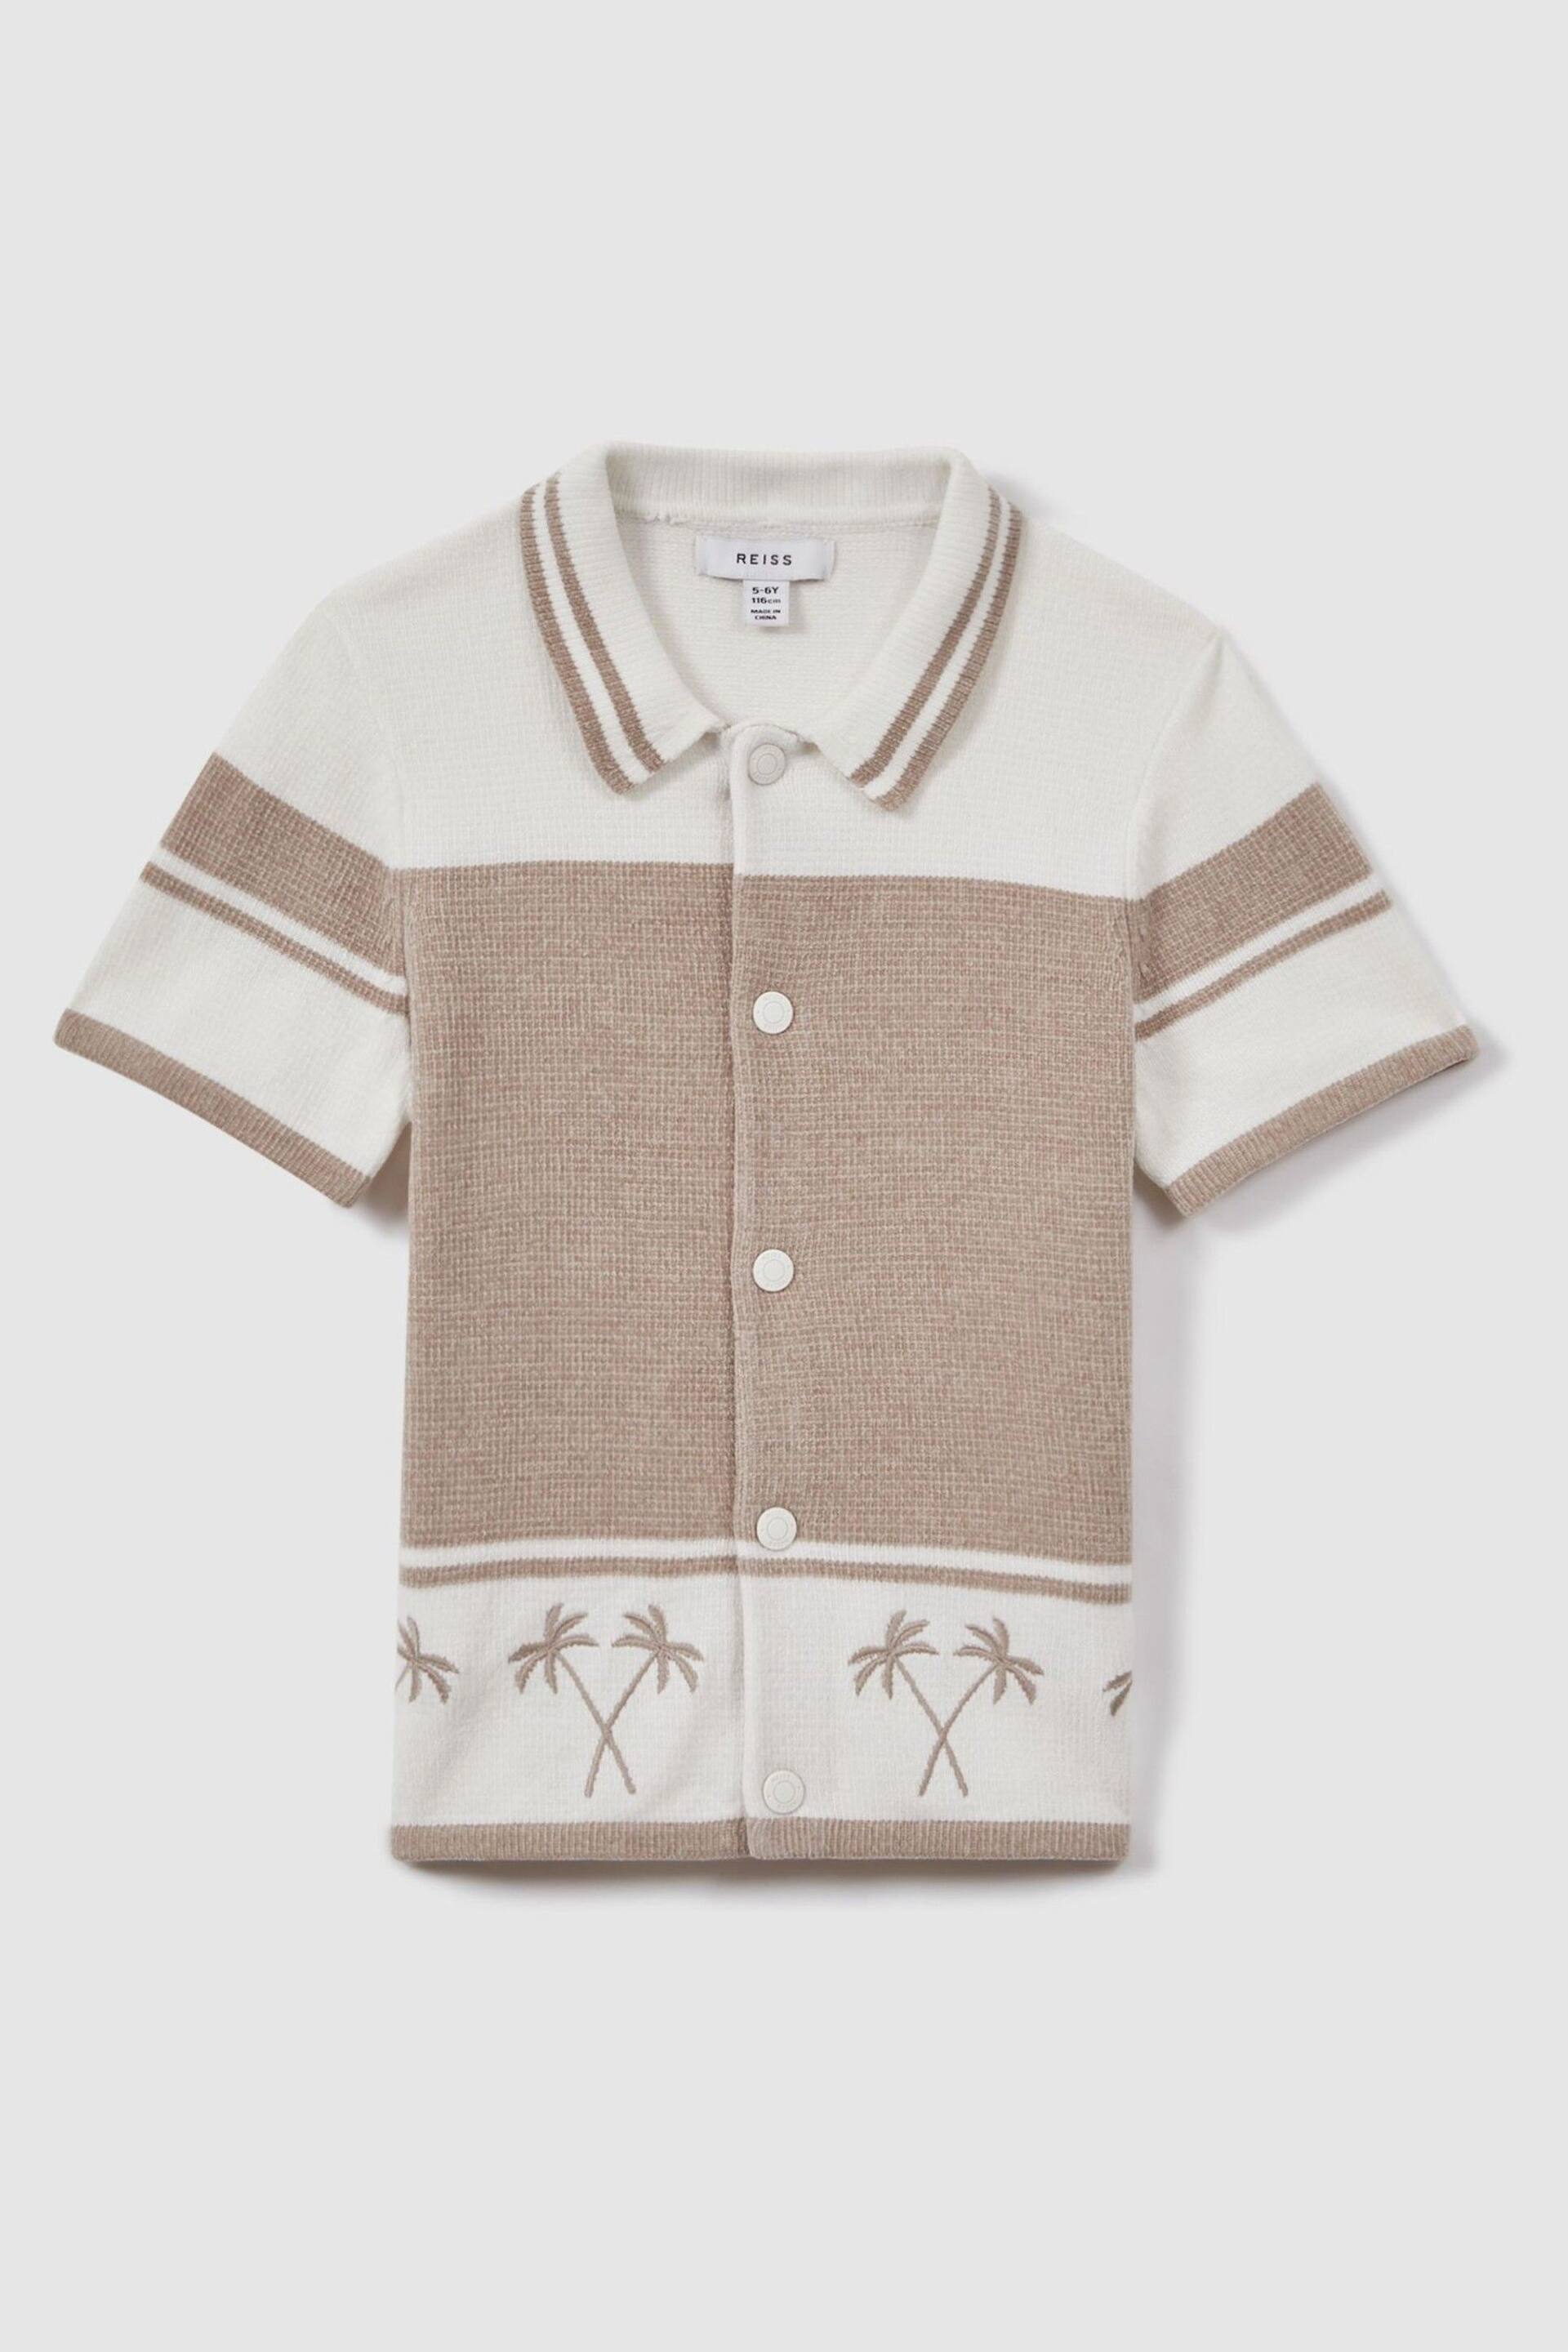 Reiss Taupe/Optic White Bowler Junior Velour Embroidered Striped Shirt - Image 2 of 4